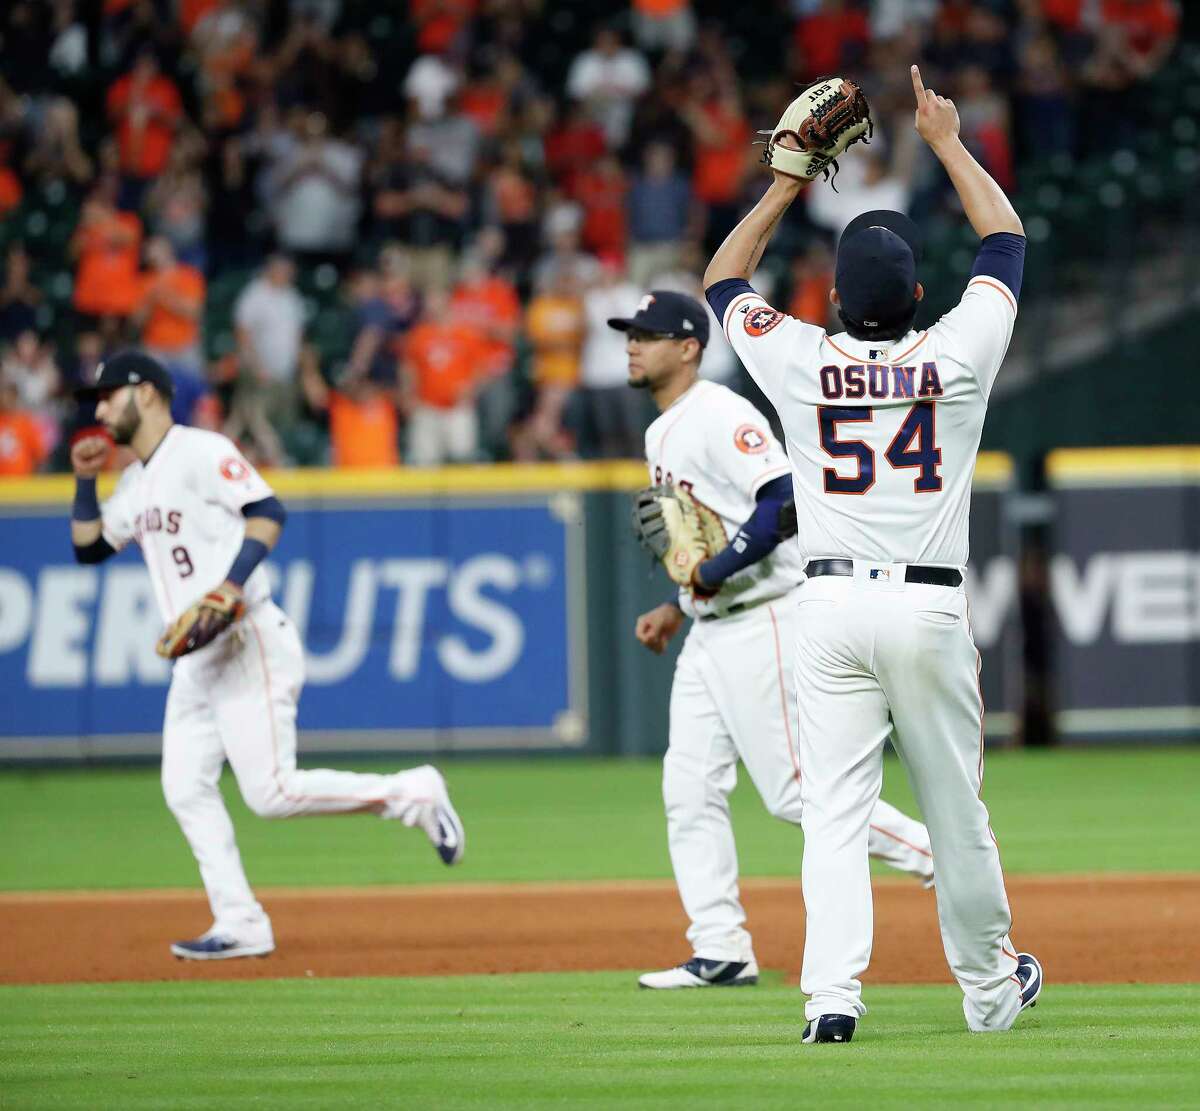 Houston Astros relief pitcher Roberto Osuna (54) celebrates the Astros 4-2 win over the Los Angeles Angels after the ninth inning of an MLB baseball game at Minute Maid Park, Sunday, September 2, 2018, in Houston.